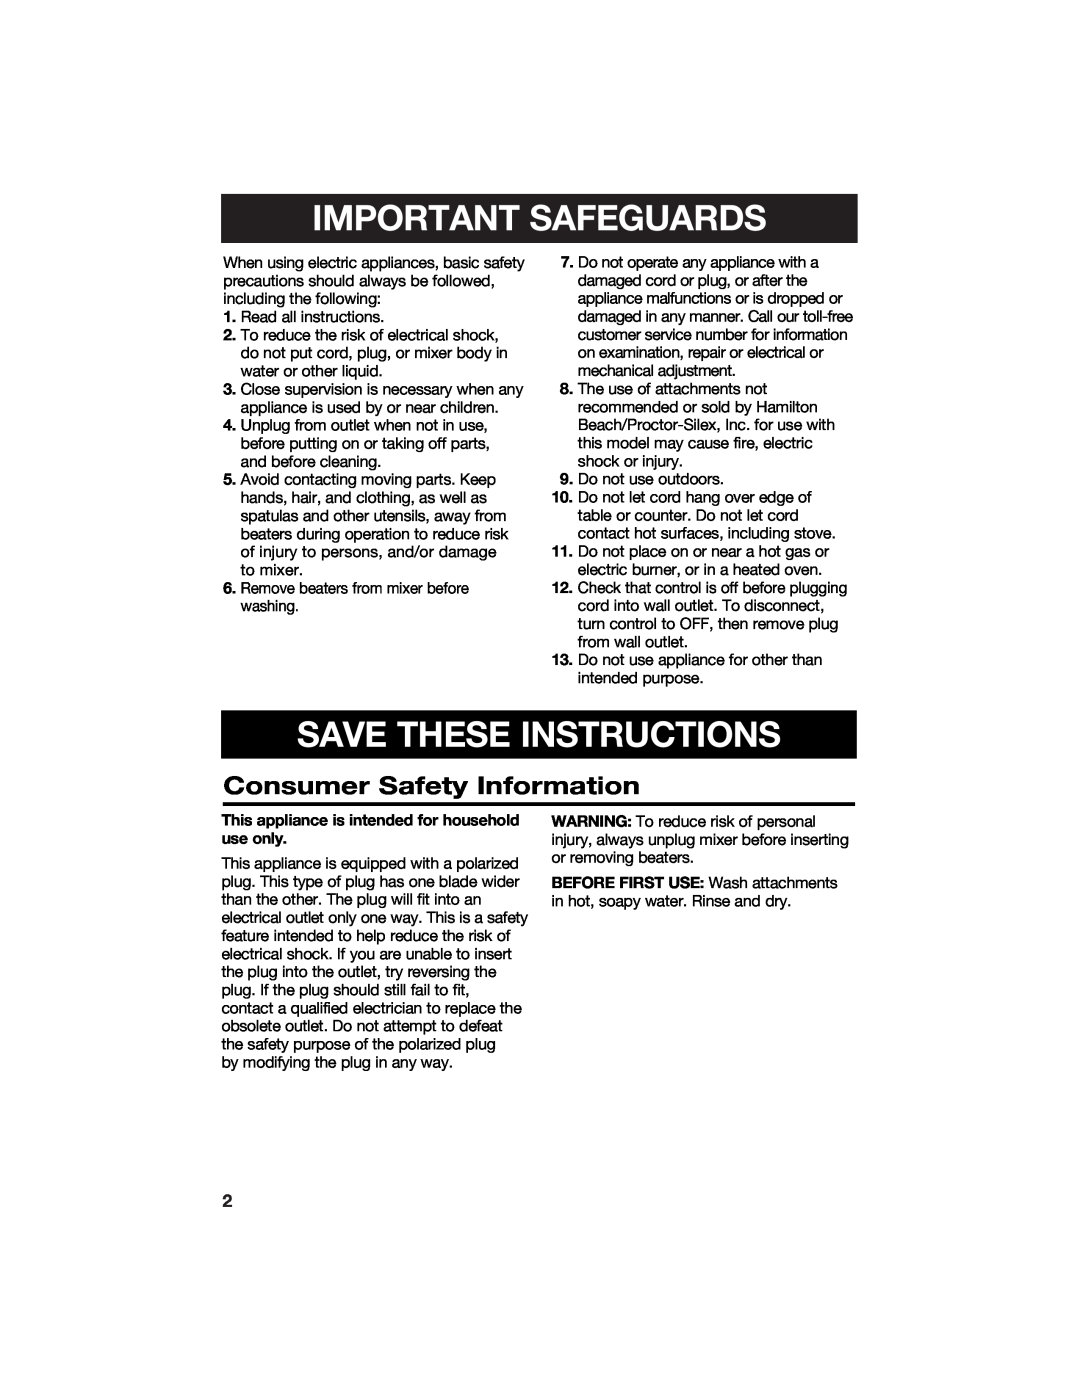 Hamilton Beach 840126200 manual Consumer Safety Information, Important Safeguards, Save These Instructions 